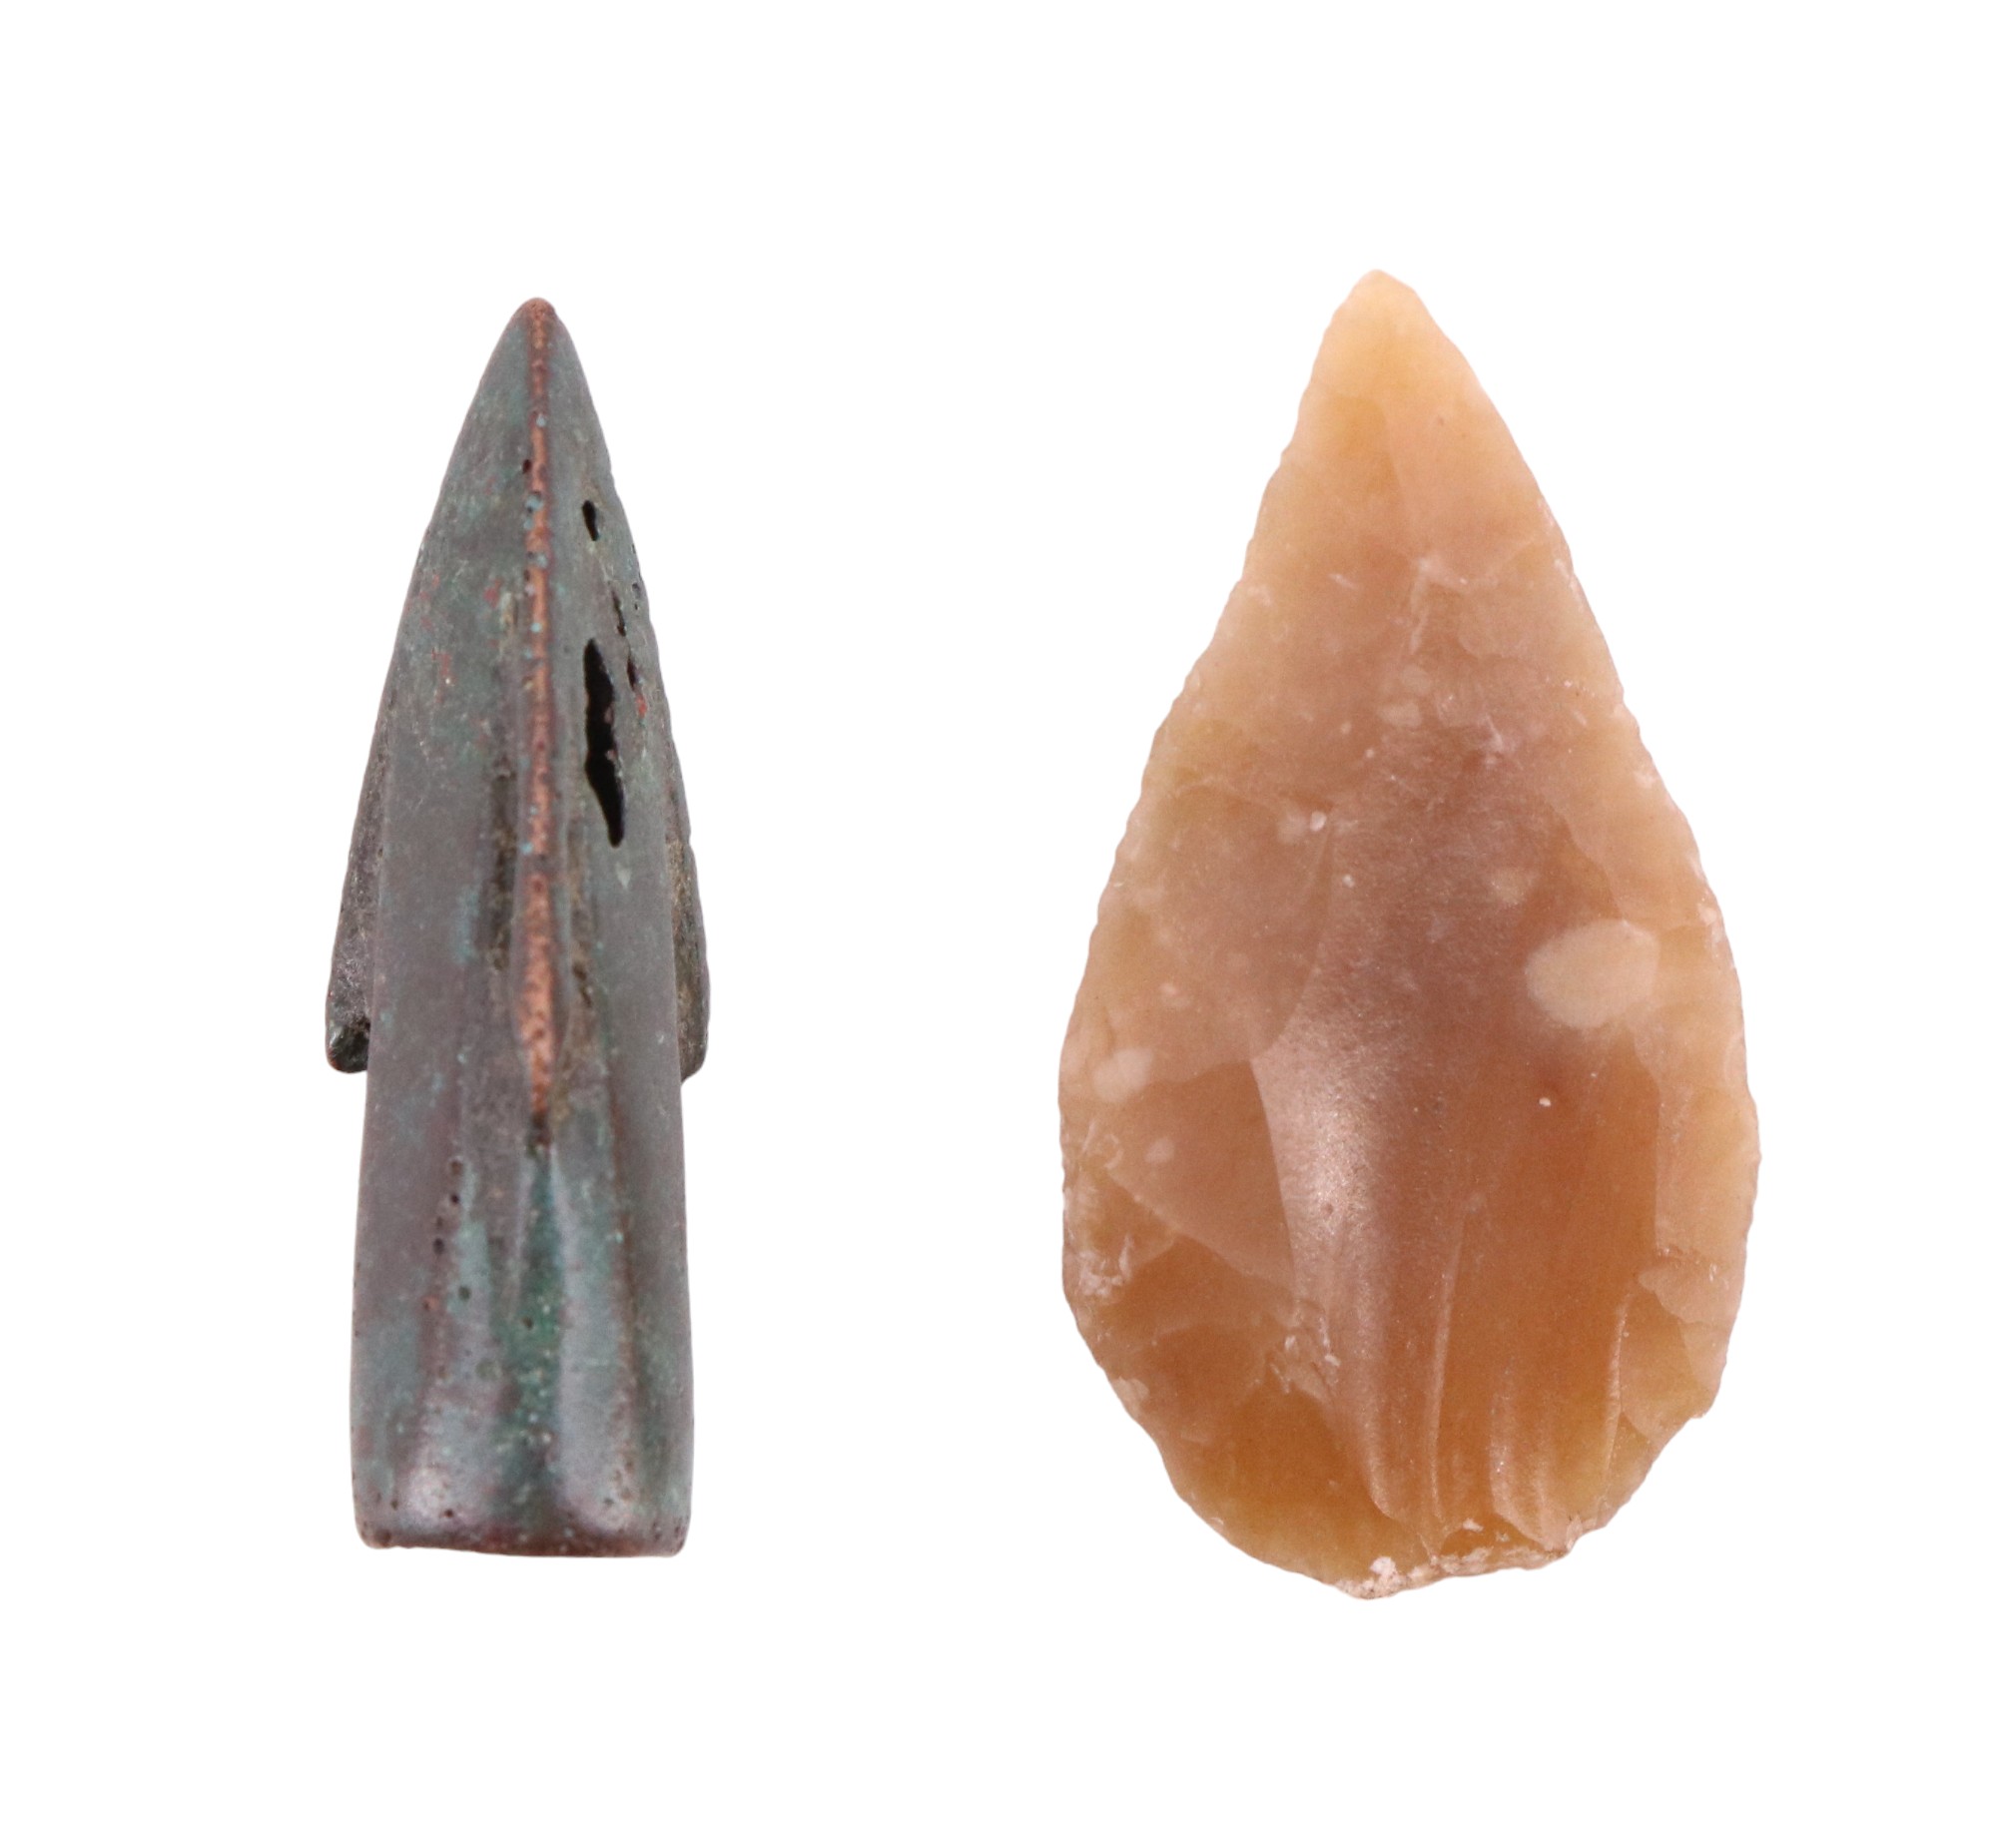 Roman bronze and Neolithic flint arrowheads, former 25 mm - Image 2 of 3